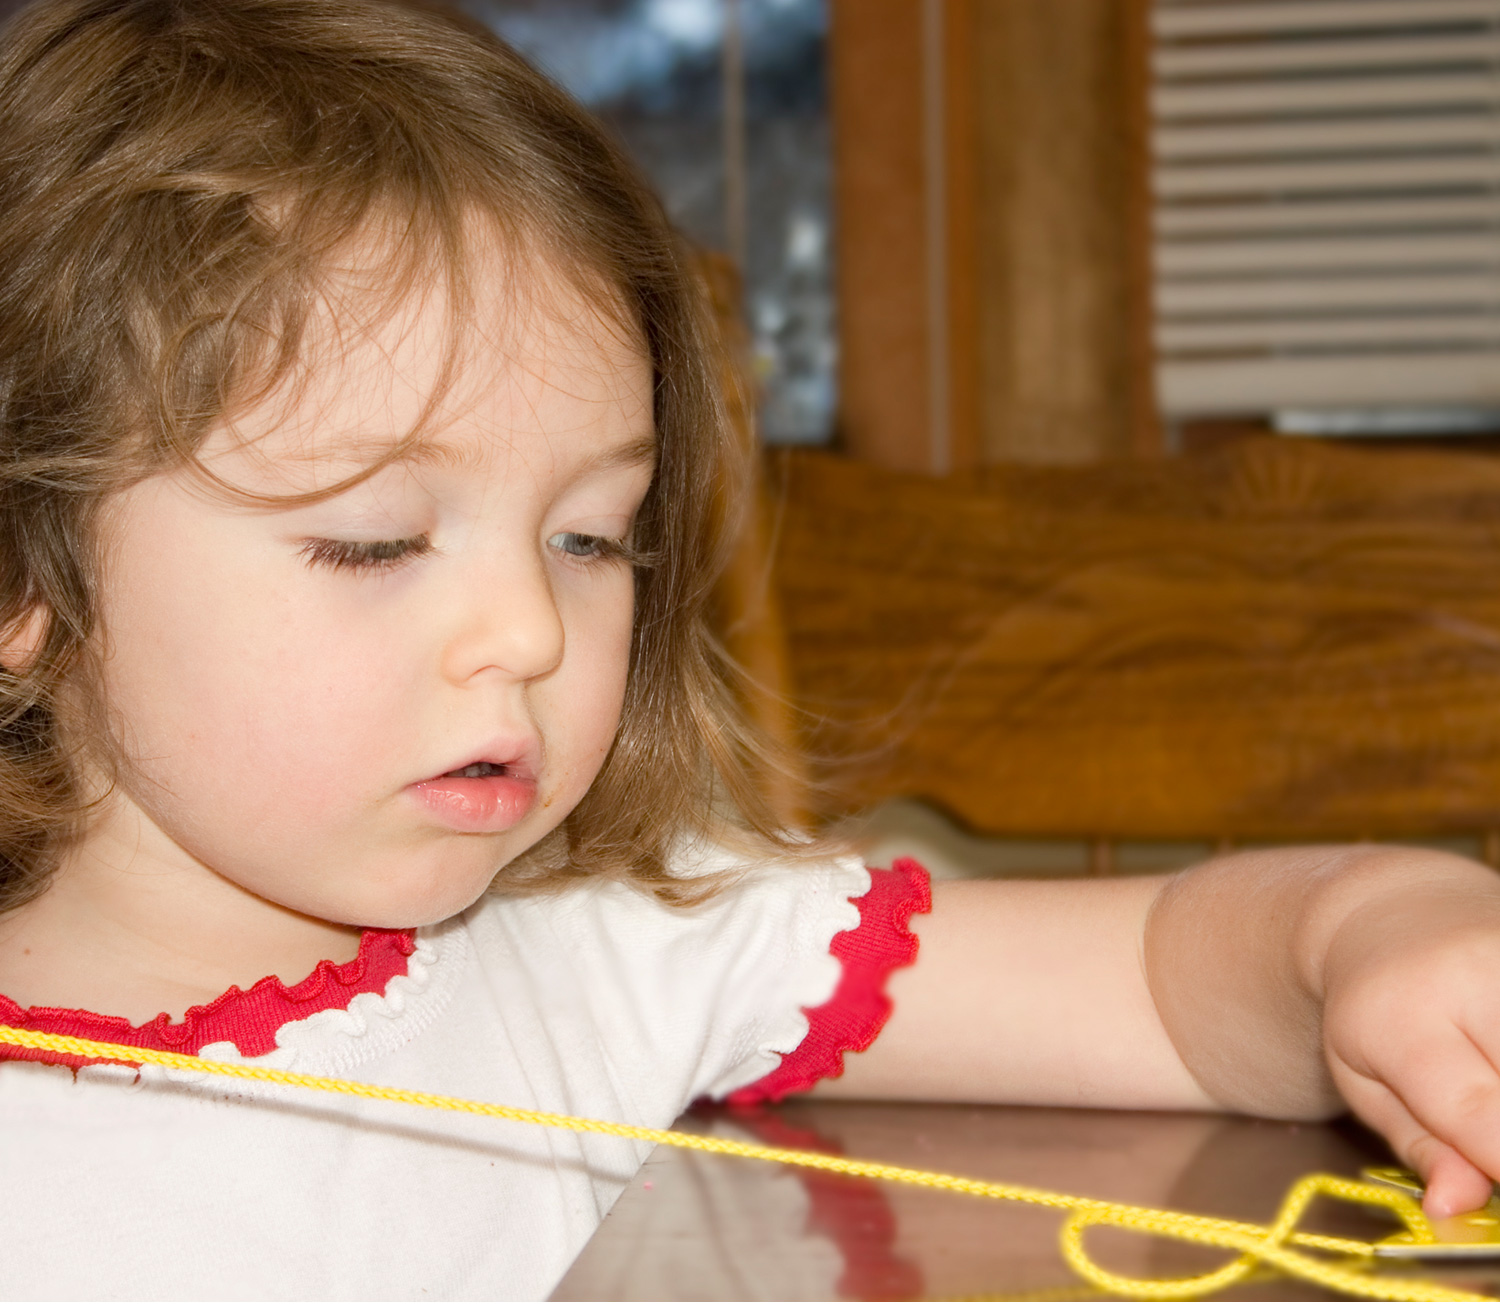 Early writing and motor skills activities designed for two-year-olds.